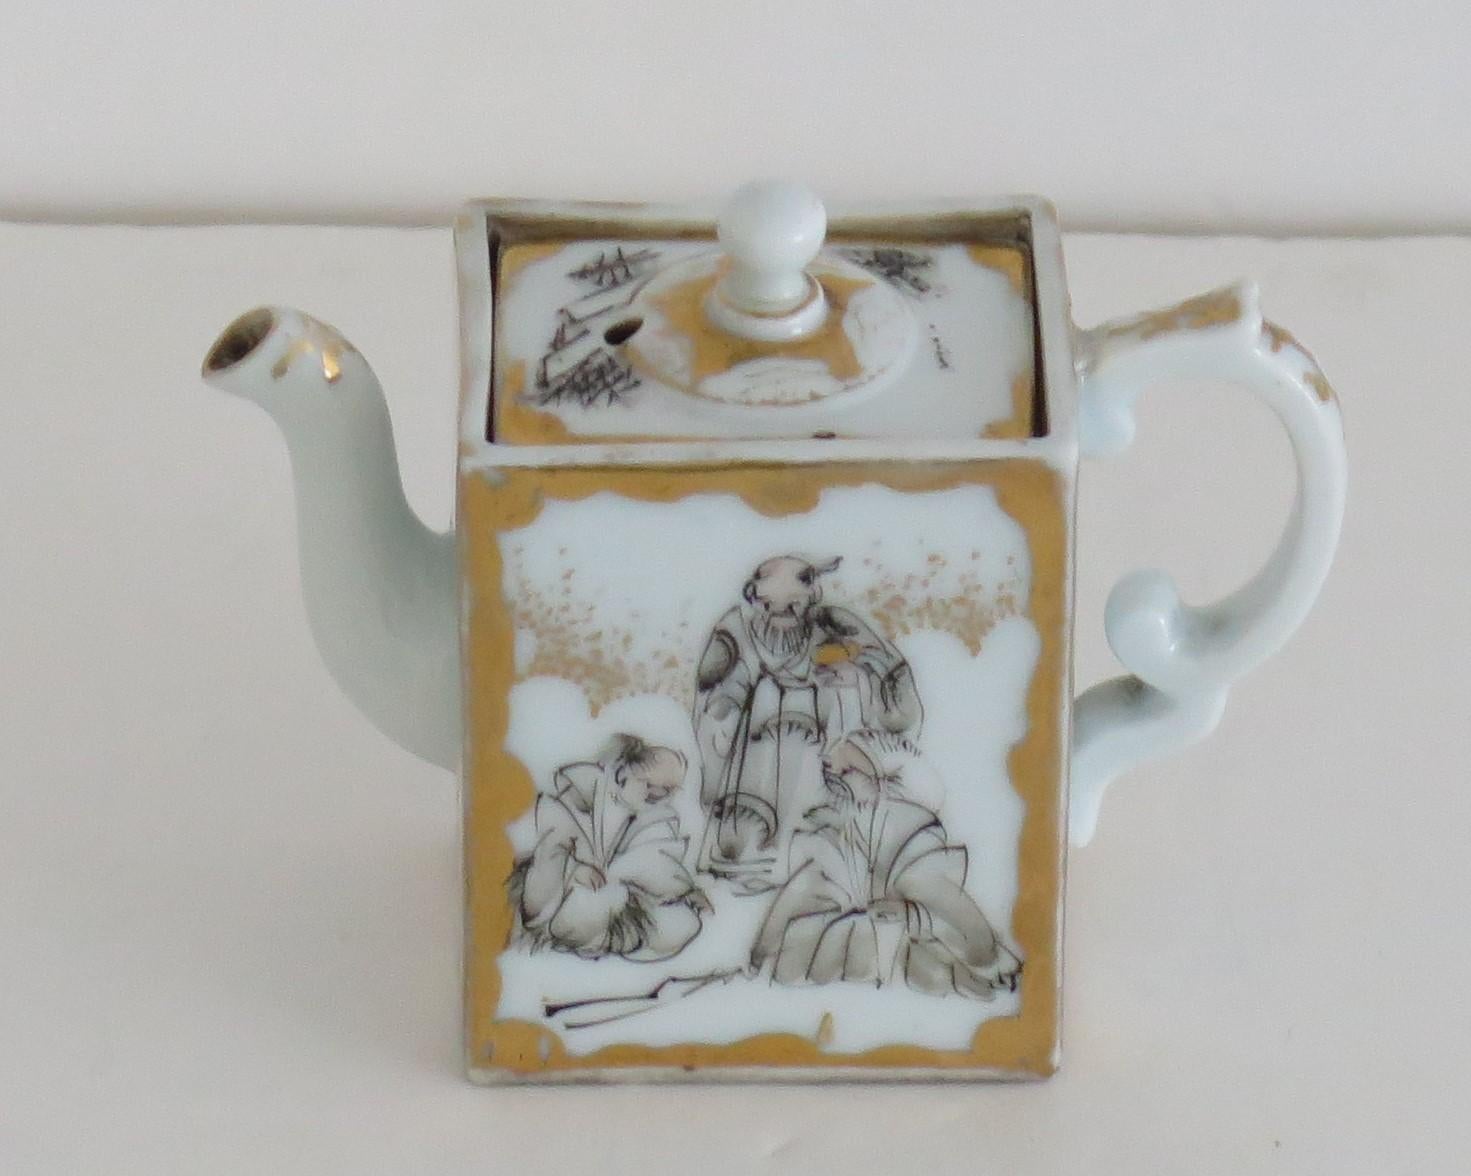 This is a beautiful, rare, rectangular small Chinese porcelain miniature teapot dating to the very early 19th Century, Daoguang period of the Qing dynasty. 

The piece is well potted in a rectangular shape with a loop handle having an upper spur.